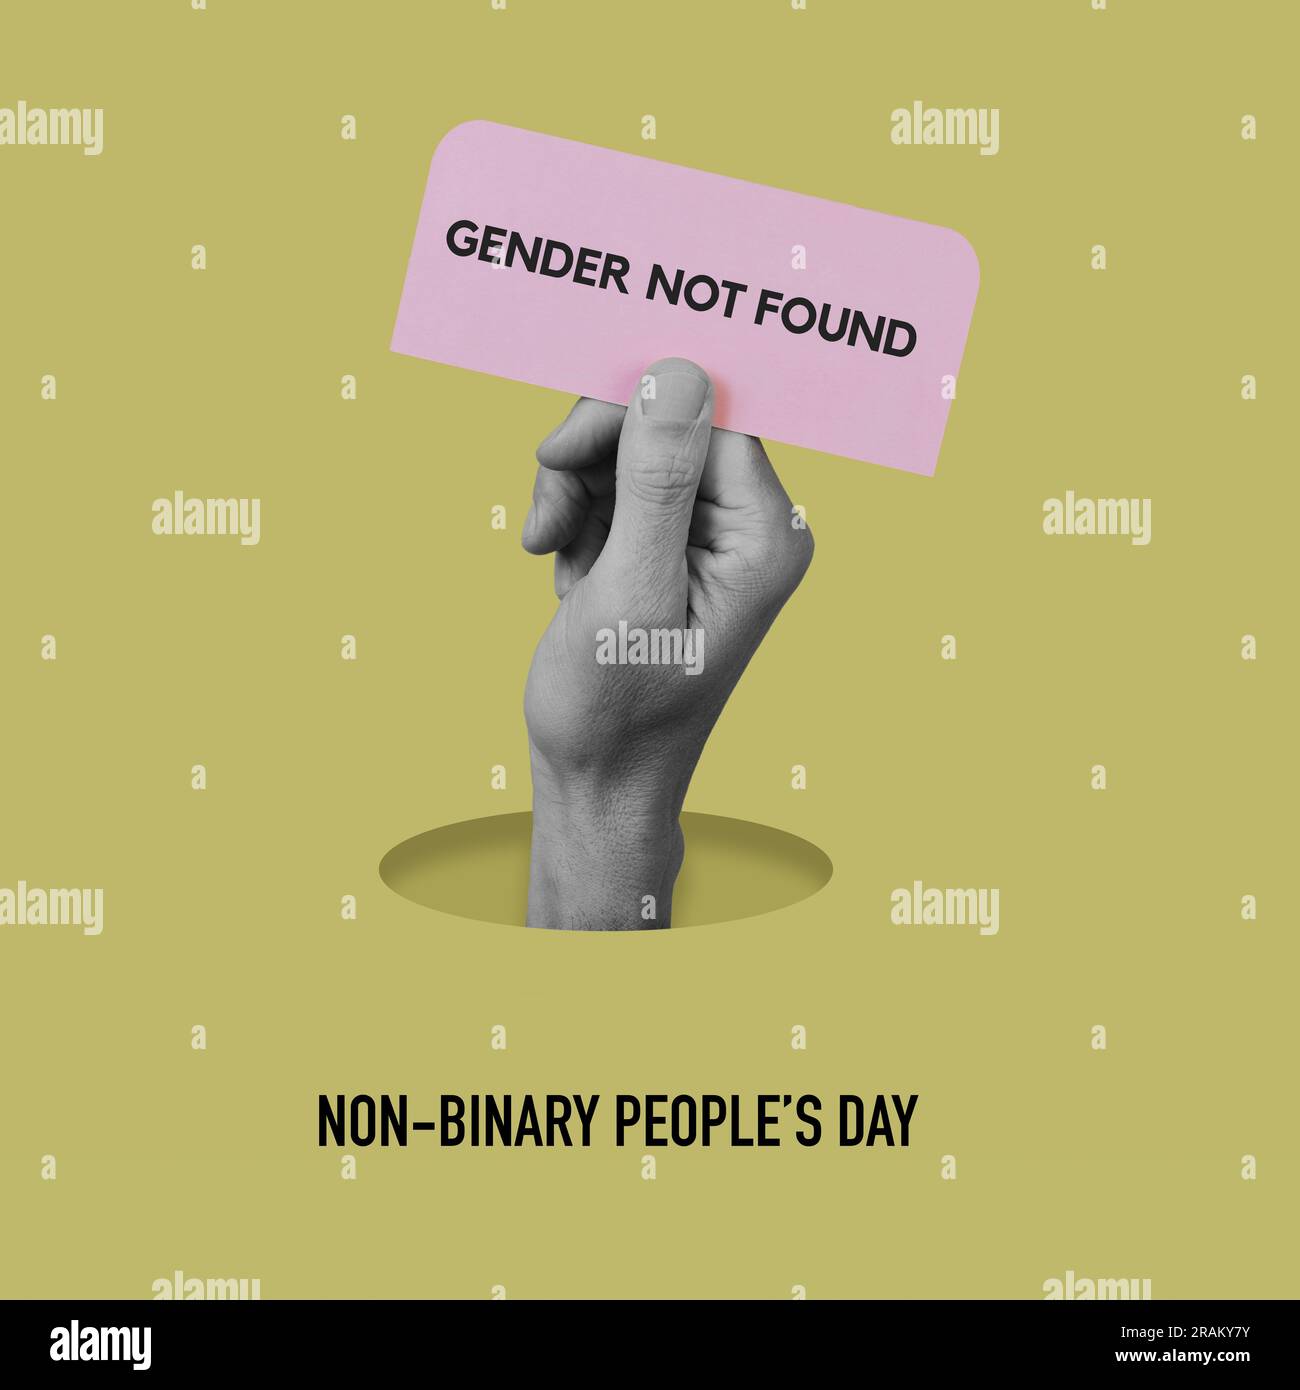 the text non-binary peoples day and a hand in black and white showing a pink signboard with the text gender not found, on a yellow background Stock Photo